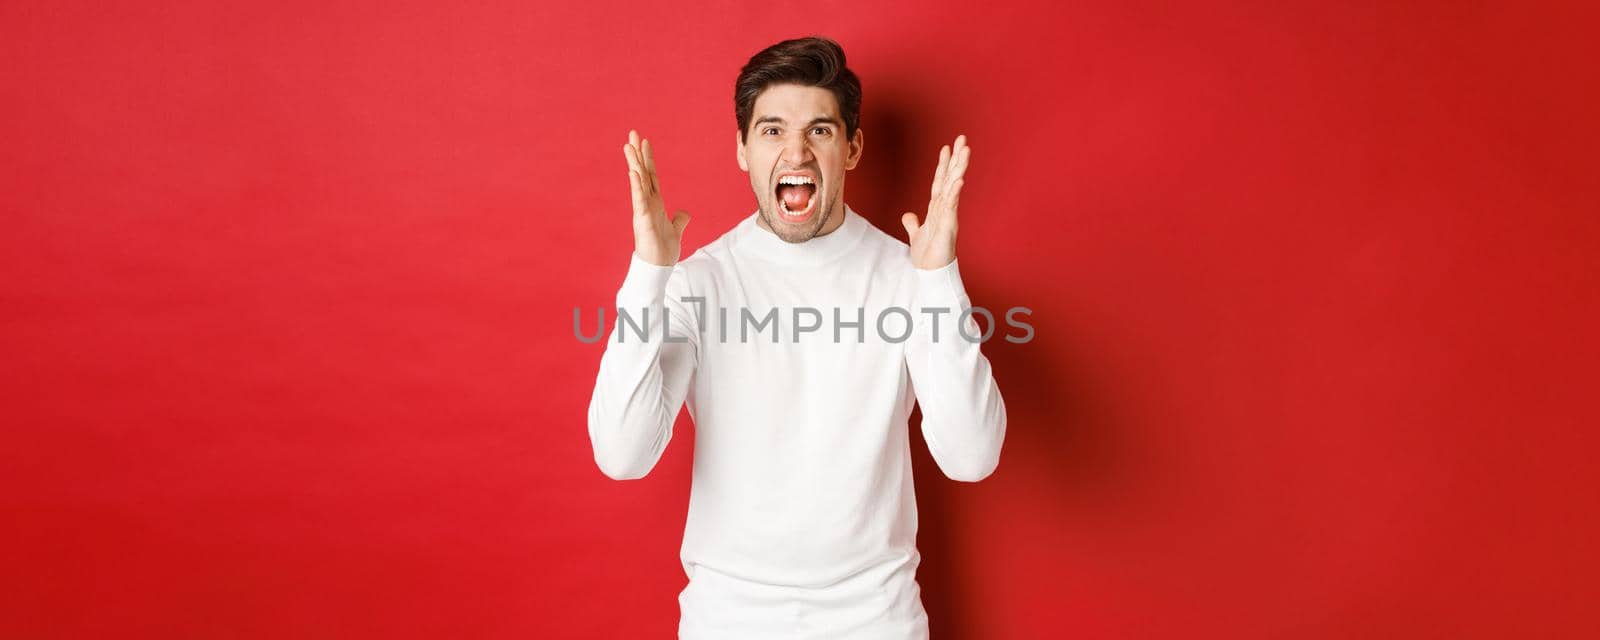 Image of frustrated and angry man in white sweater, shouting in rage, being mad at someone, standing over red background.